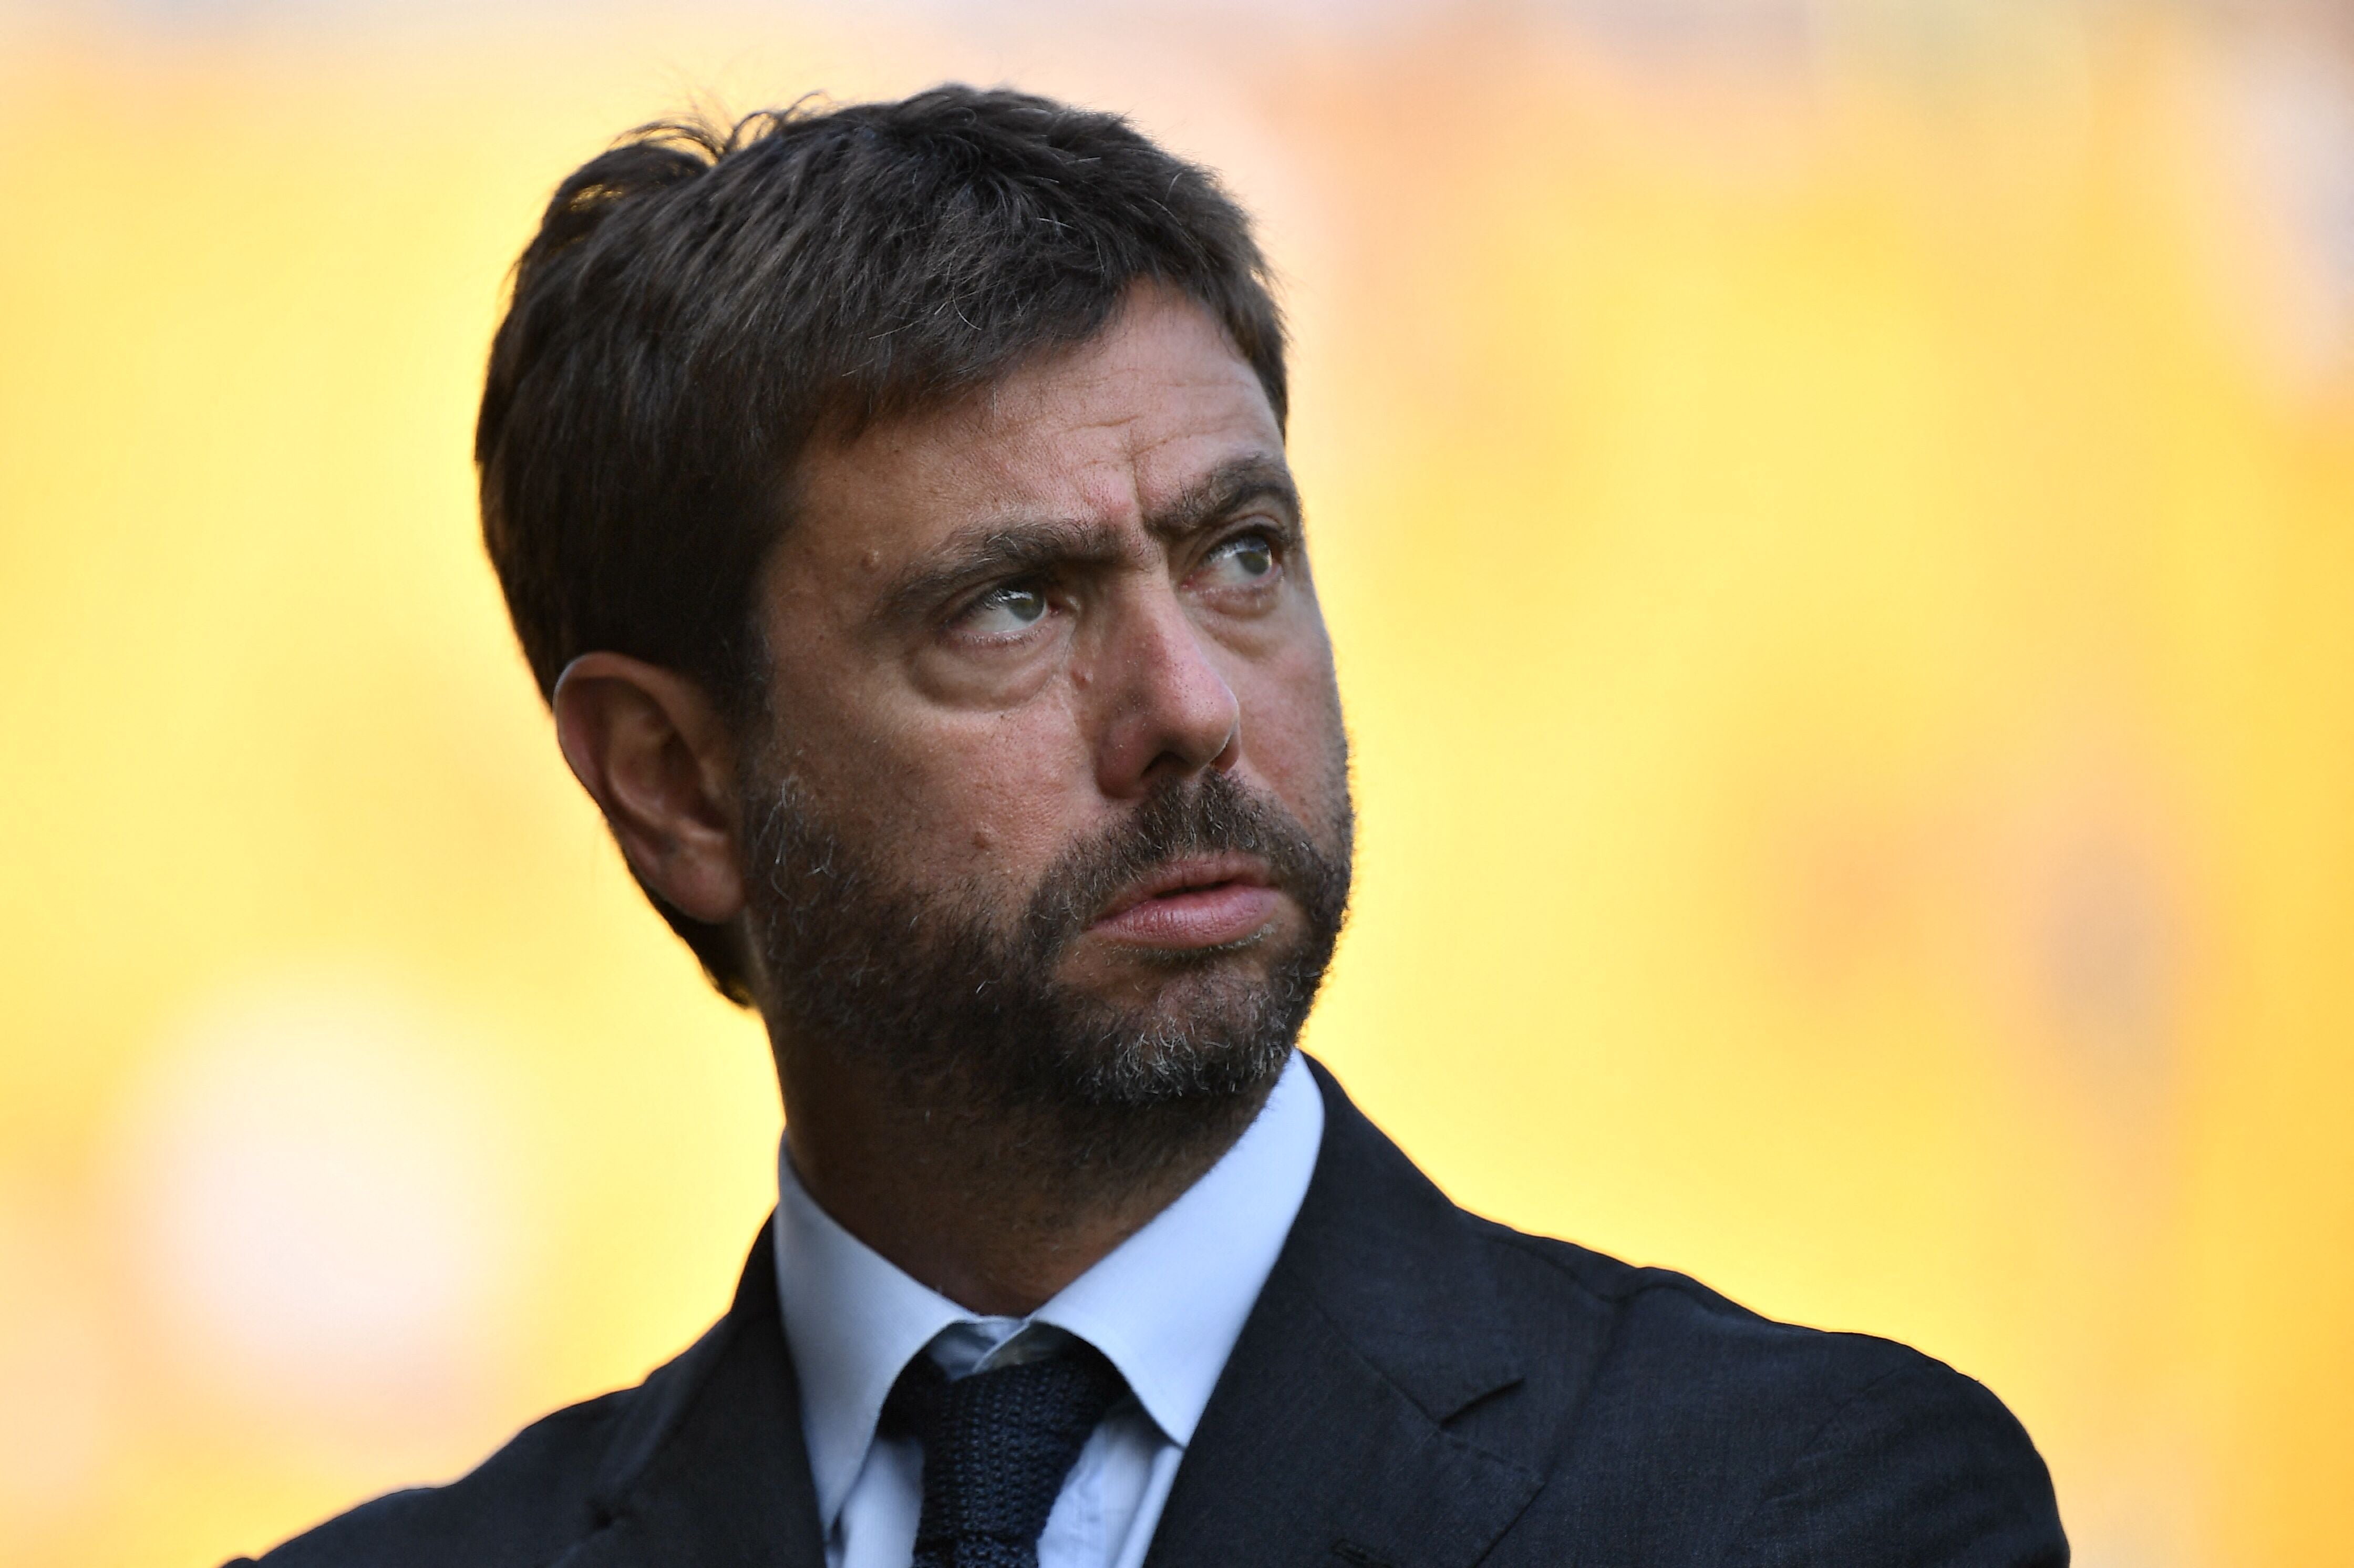 Andrea Agnelli has been a key player in the Super League plan